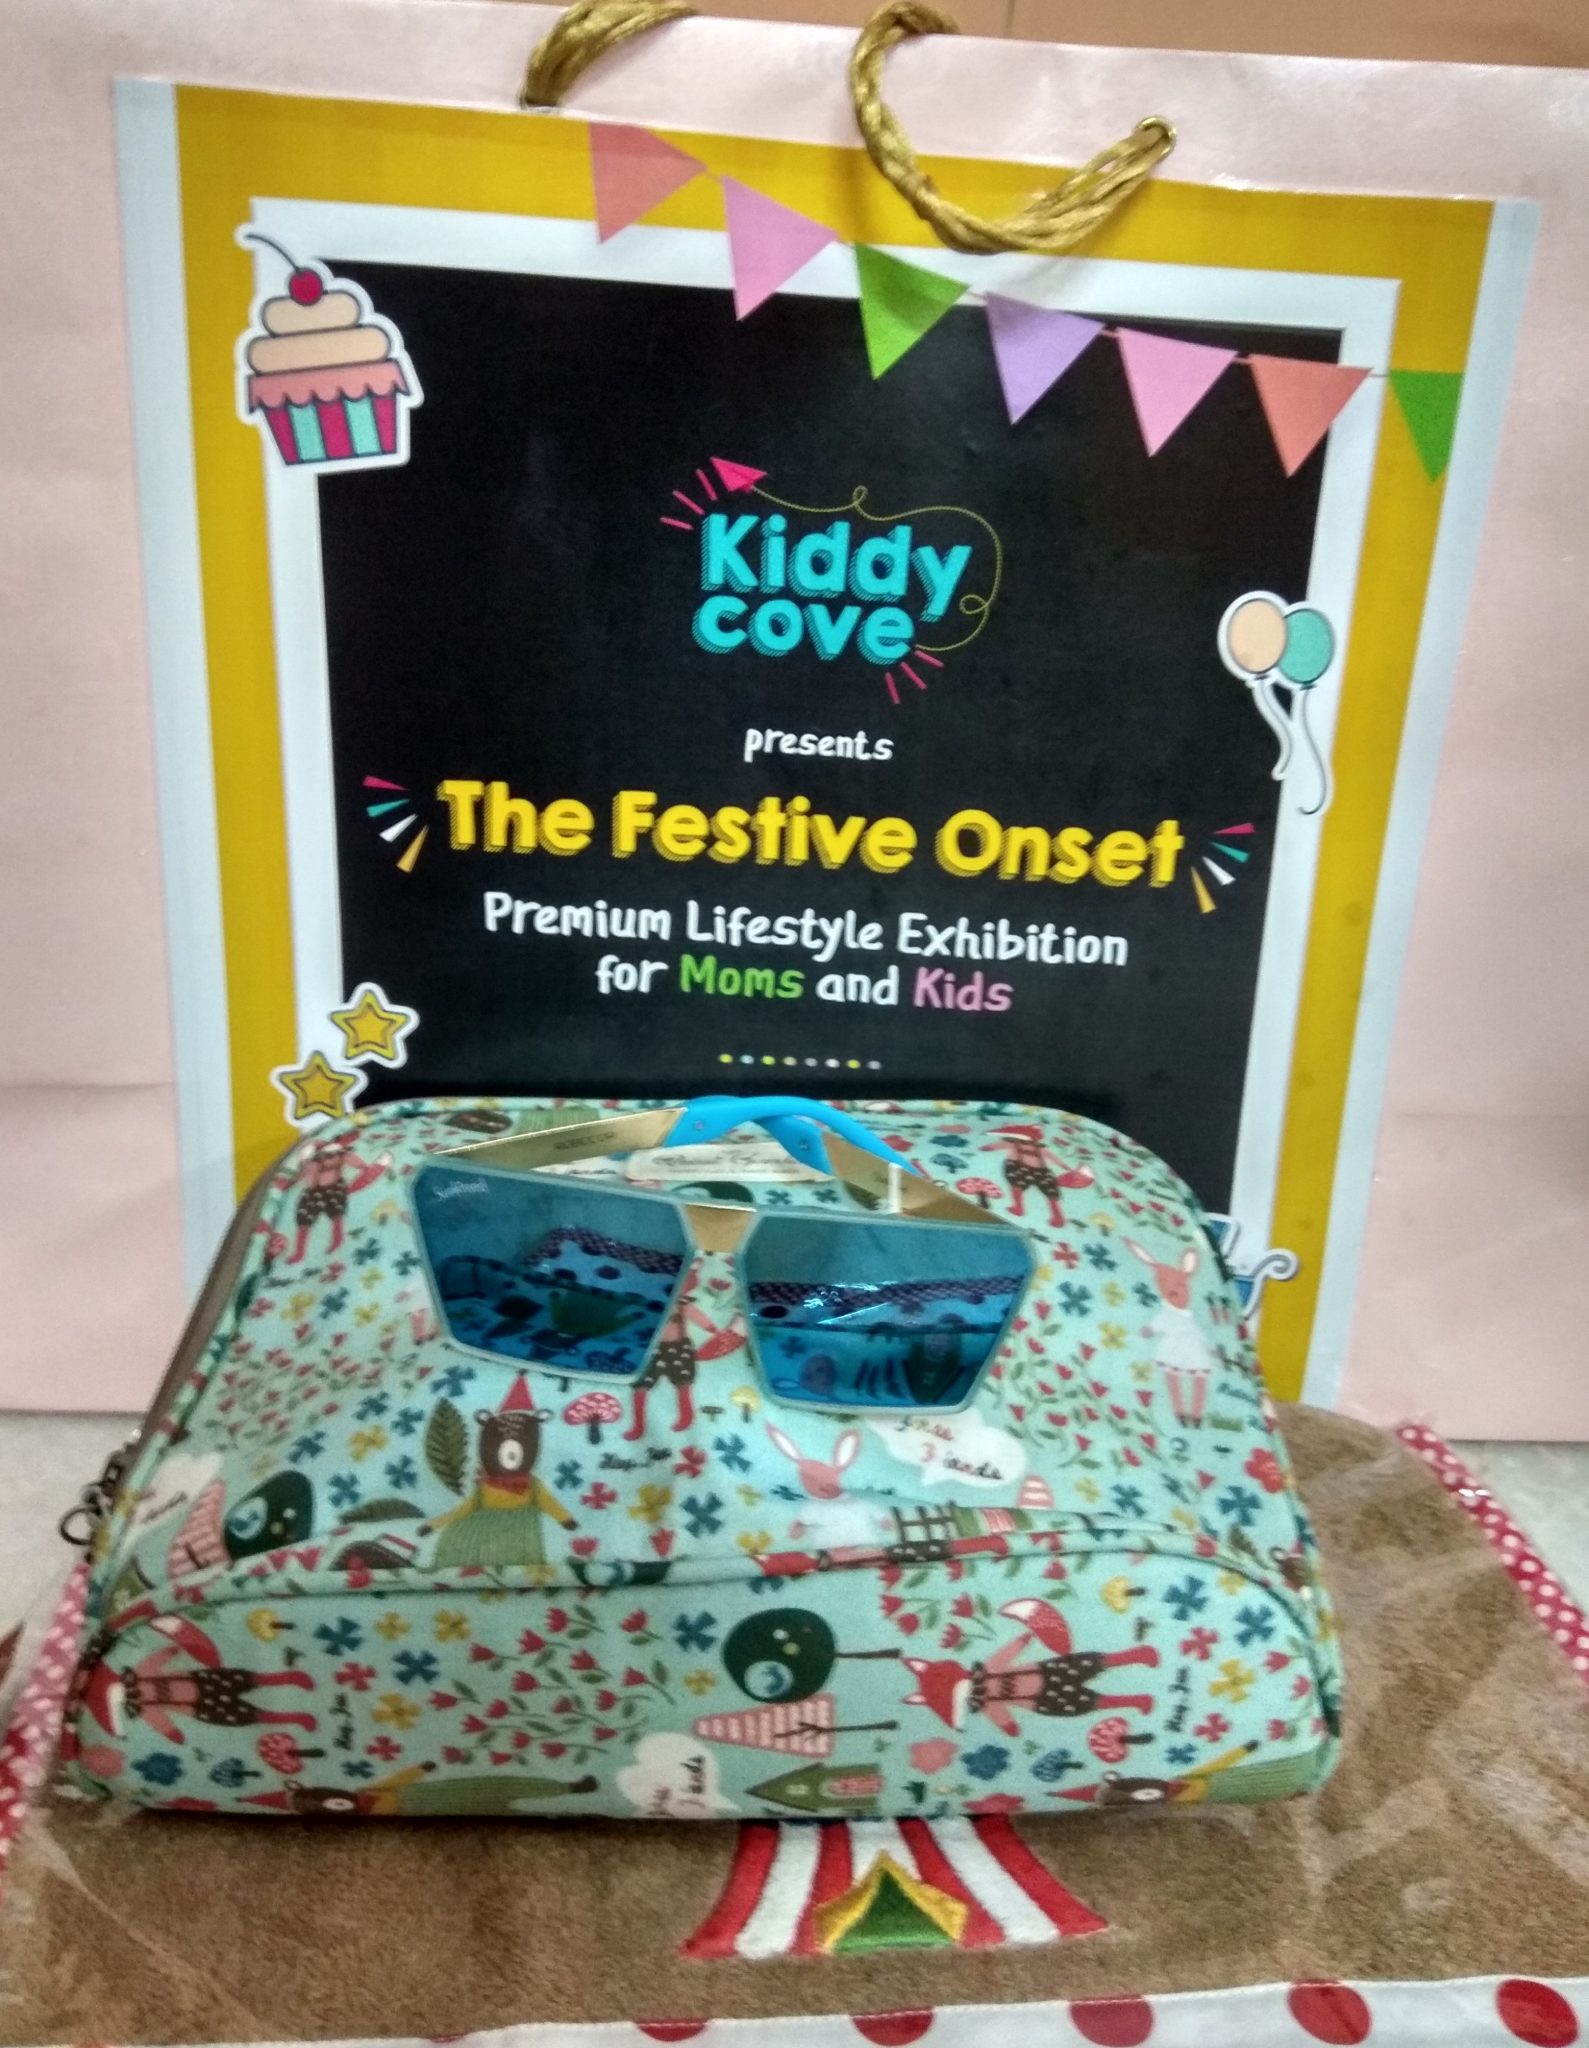 The recently concluded Kiddy Cove exhibition at Noida was a great shopping platform for mama's and kids. A really fun event at Noida for trendy moms. #exhibition #kiddycove #mumsandbabies #noida #event